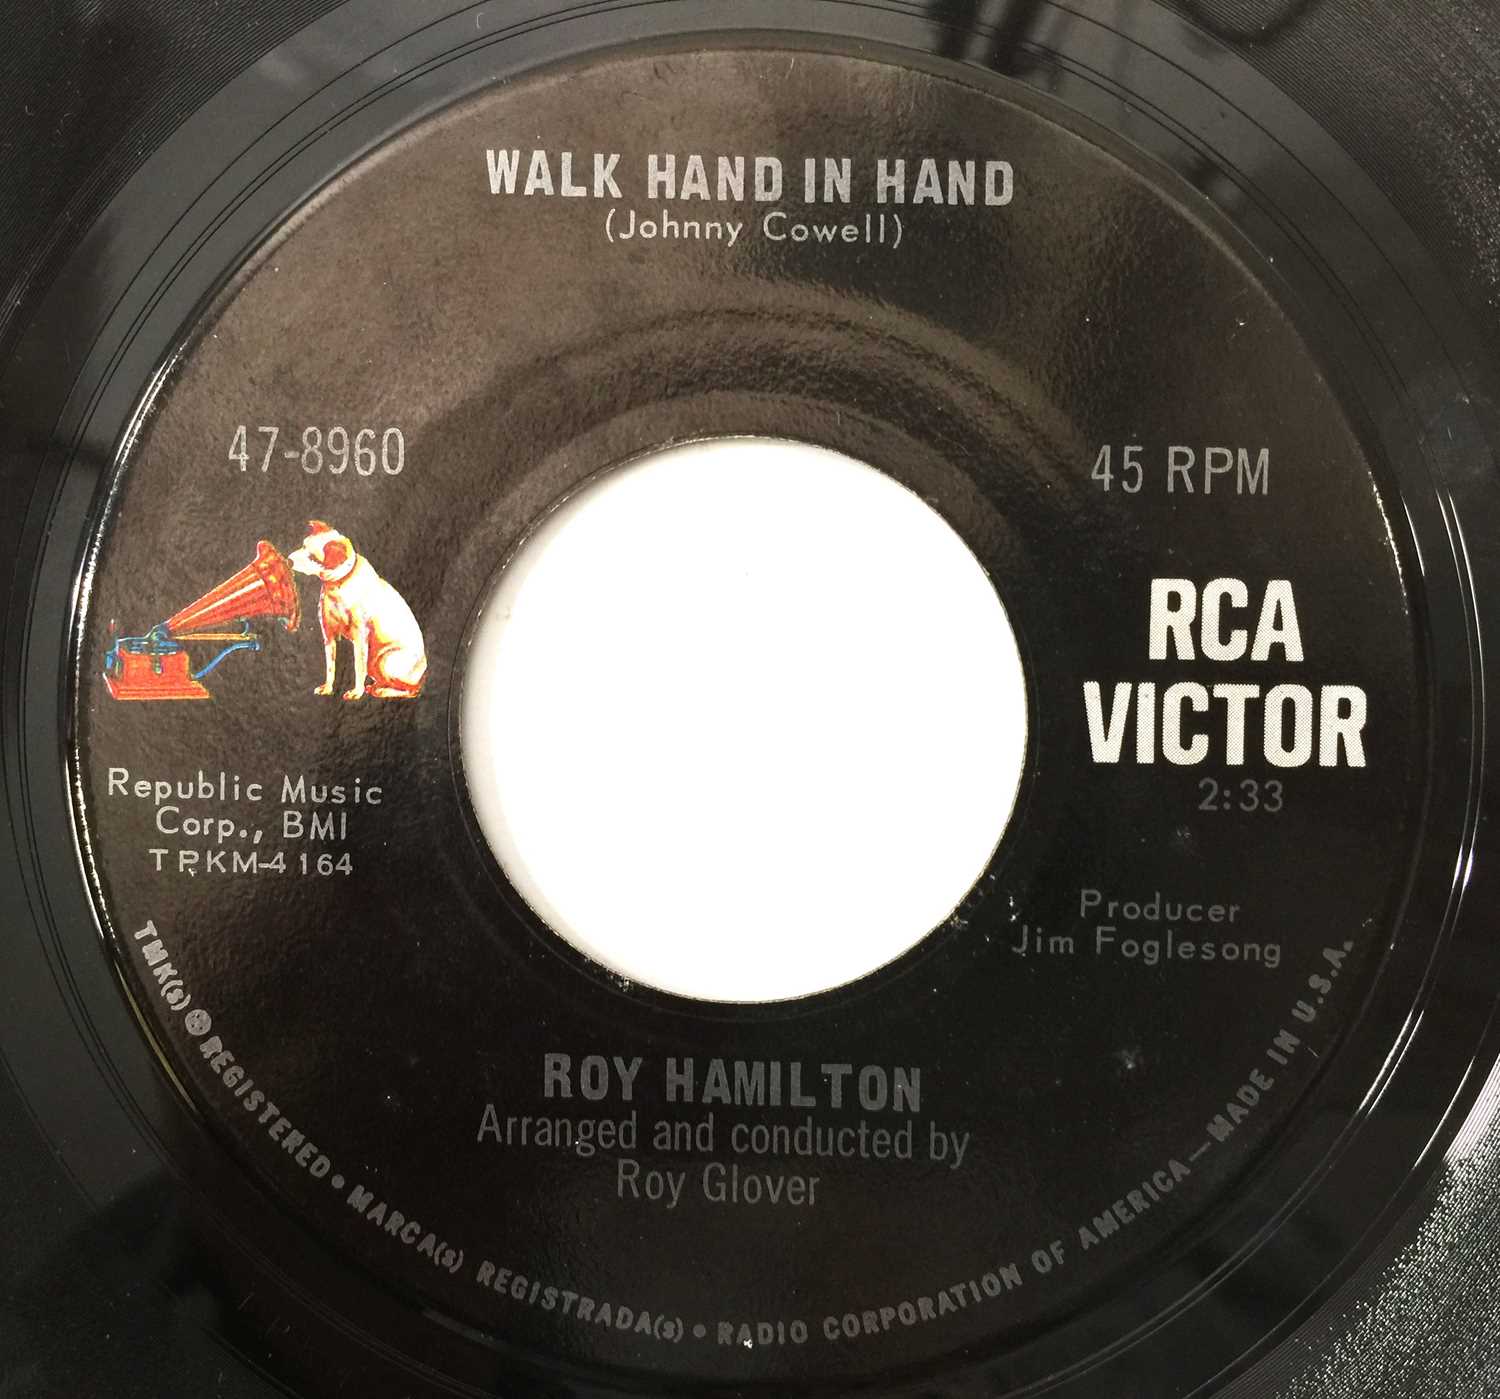 ROY HAMILTON - CRACKIN' UP OVER YOU/ WALK HAND IN HAND 7" (US NORTHERN - RCA VICTOR - 47-8960) - Image 3 of 3